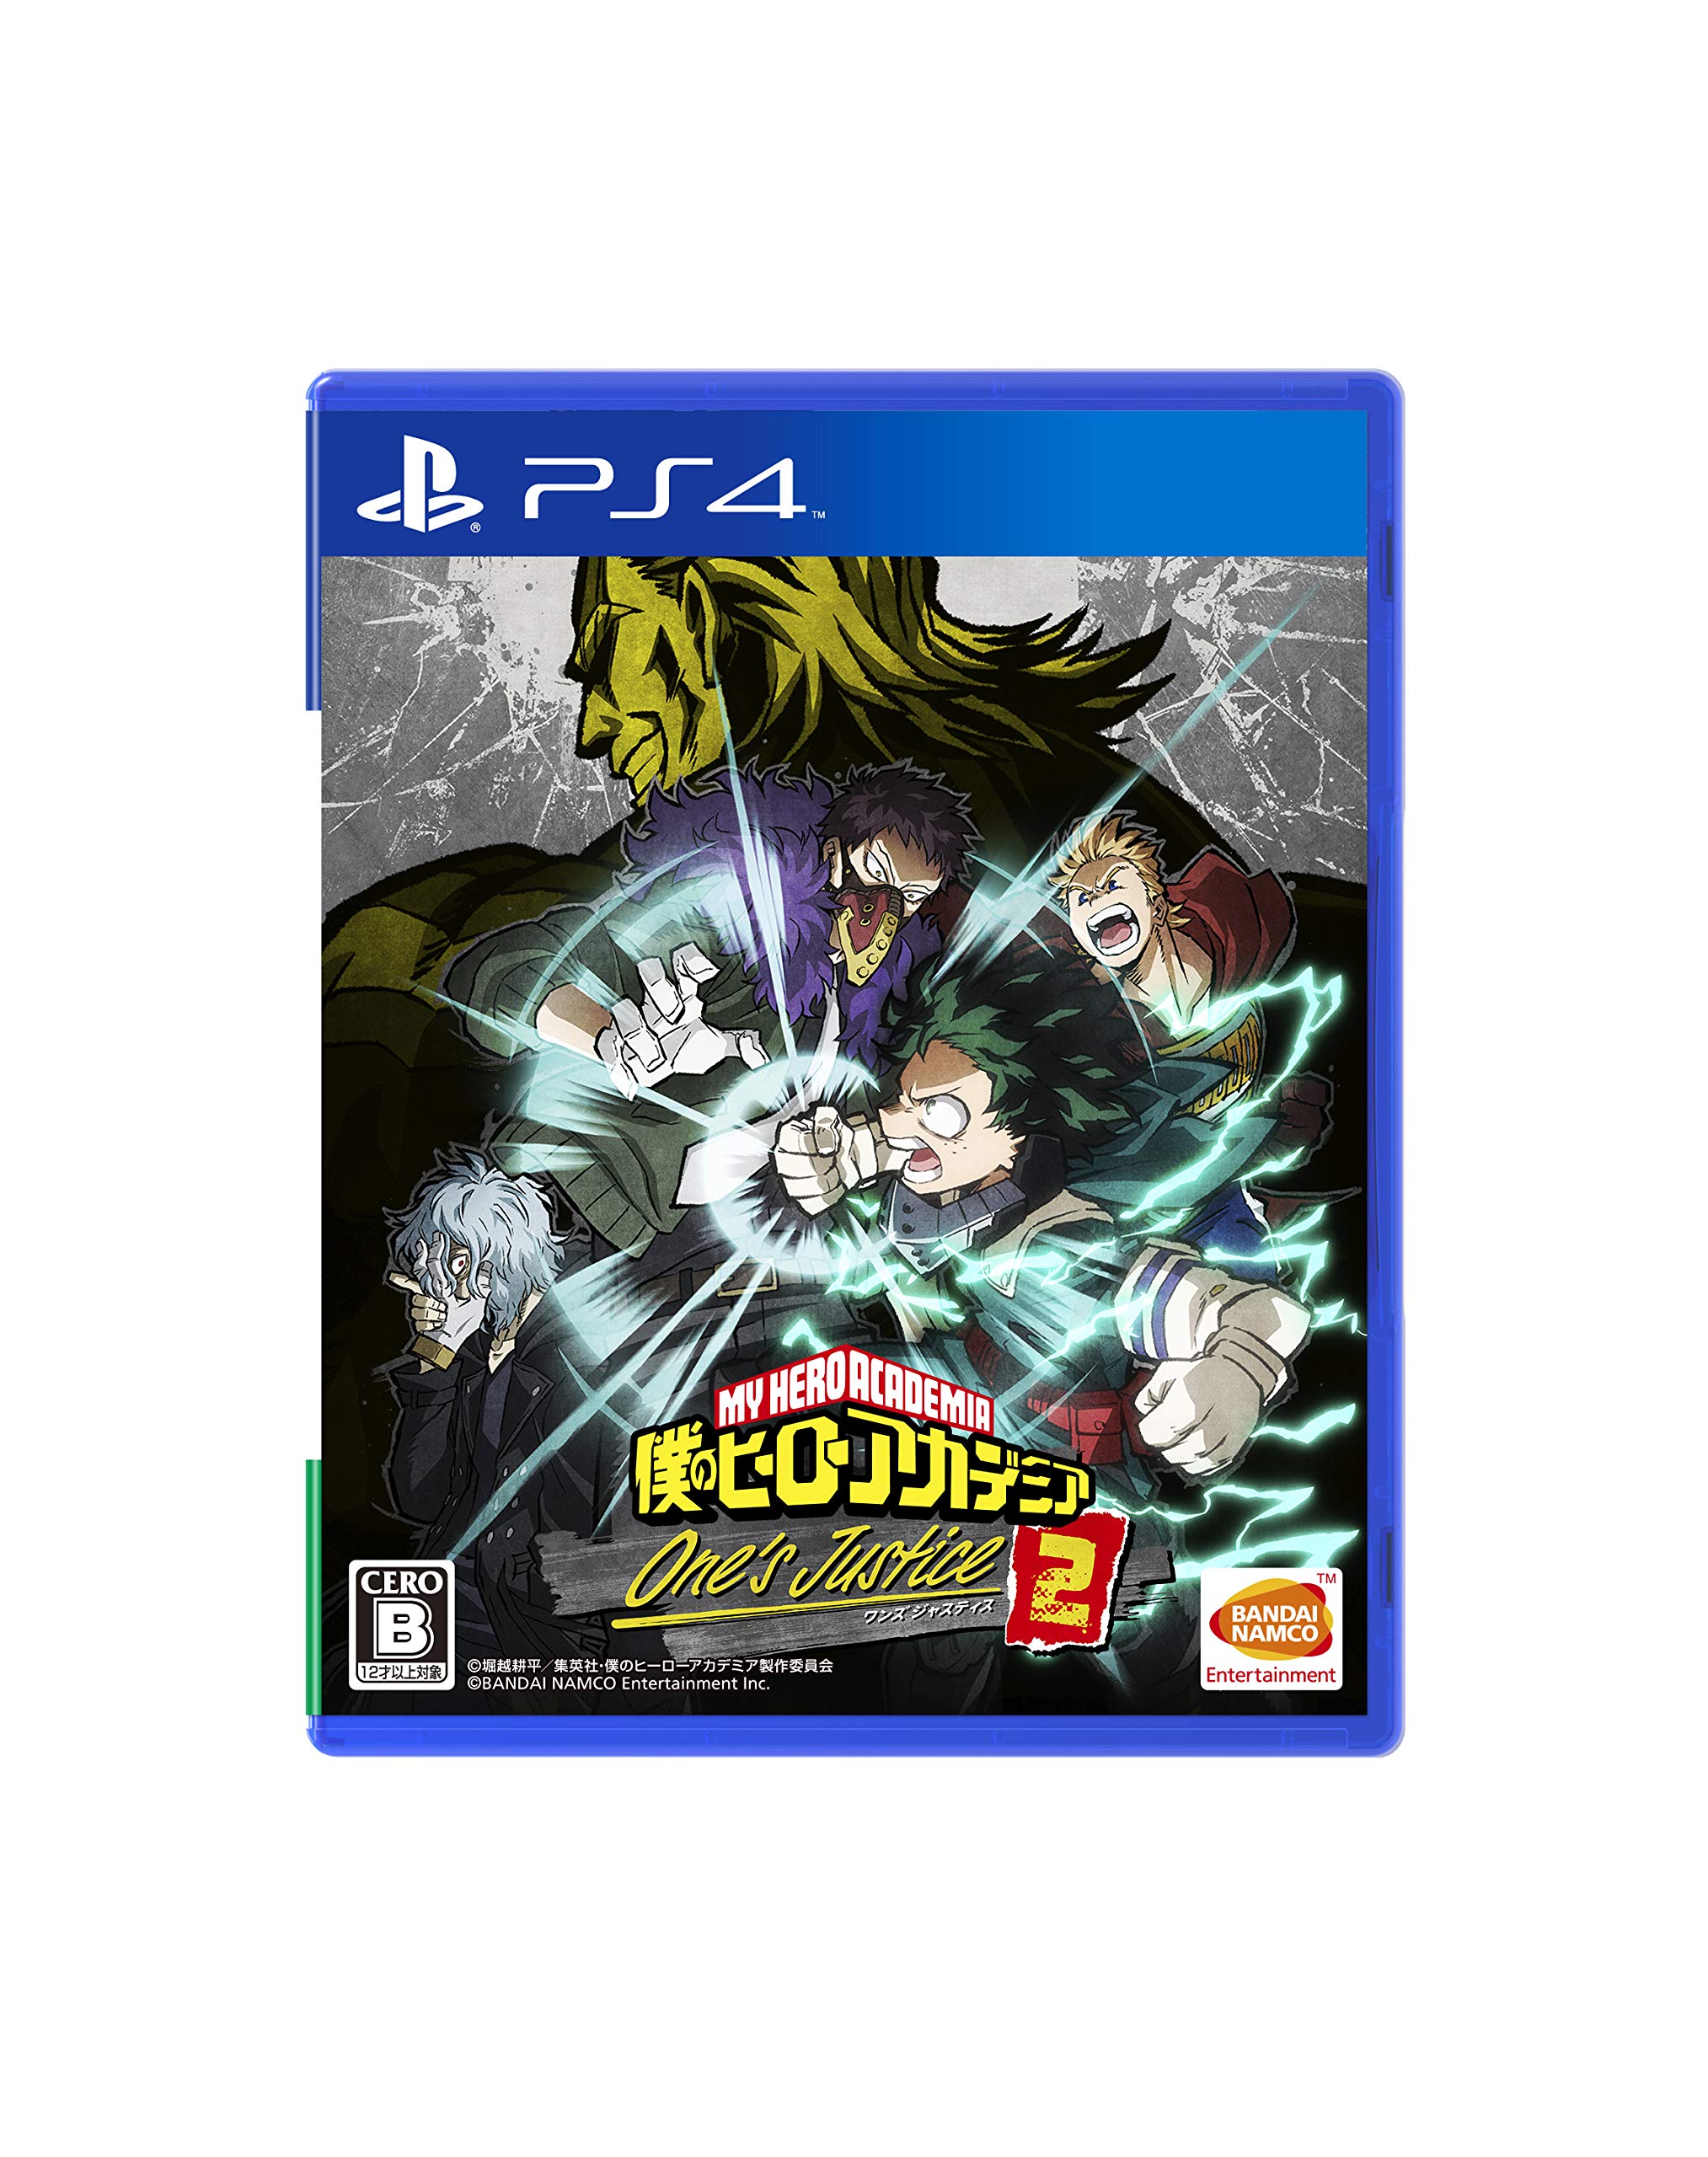 PS4僕のヒーローアカデミア One's Justice2画像